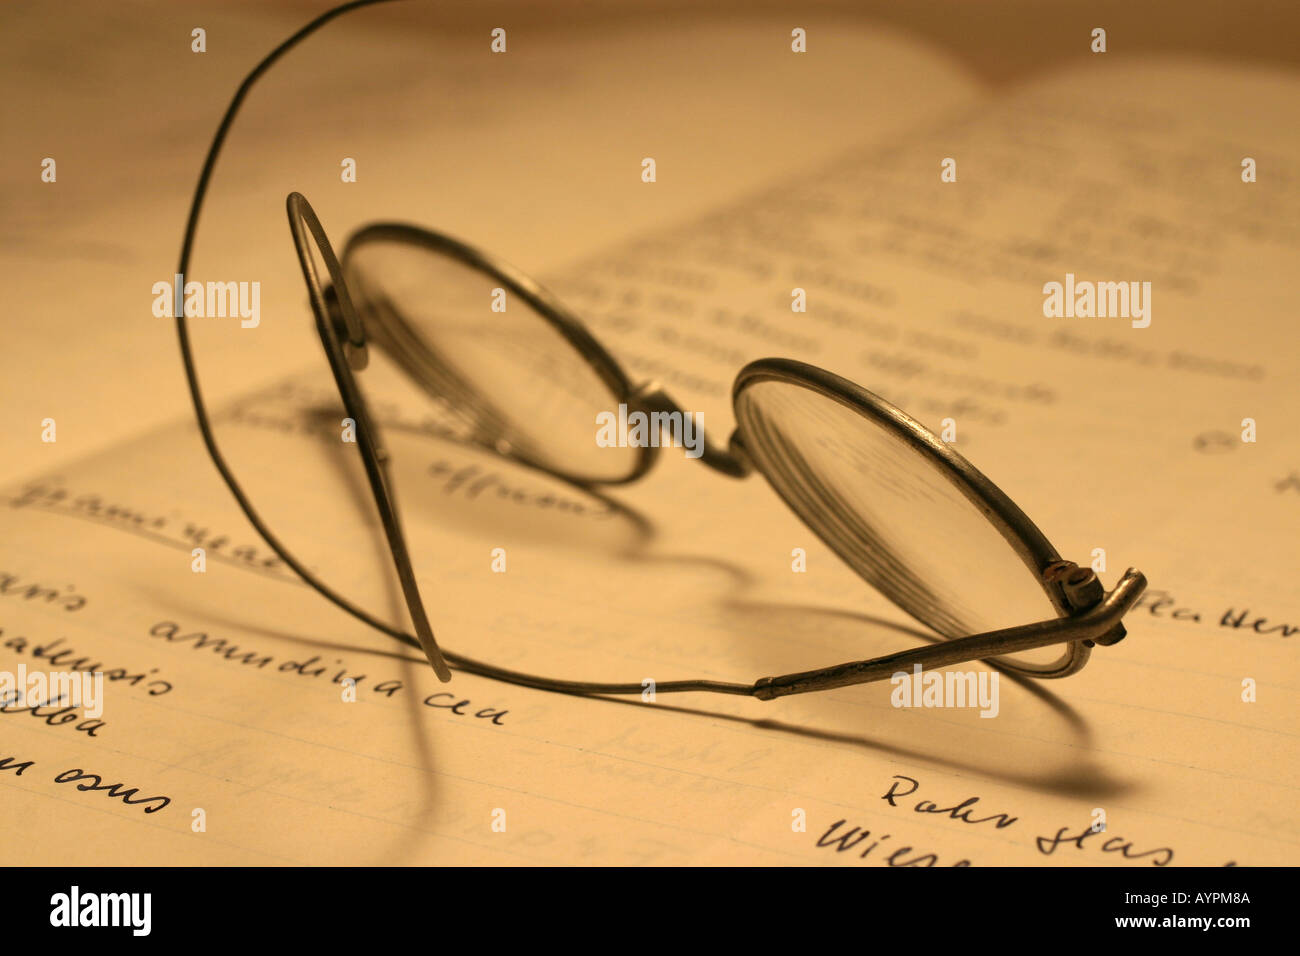 Blurred view of text seen on the book with spectacles kept on it Stock Photo